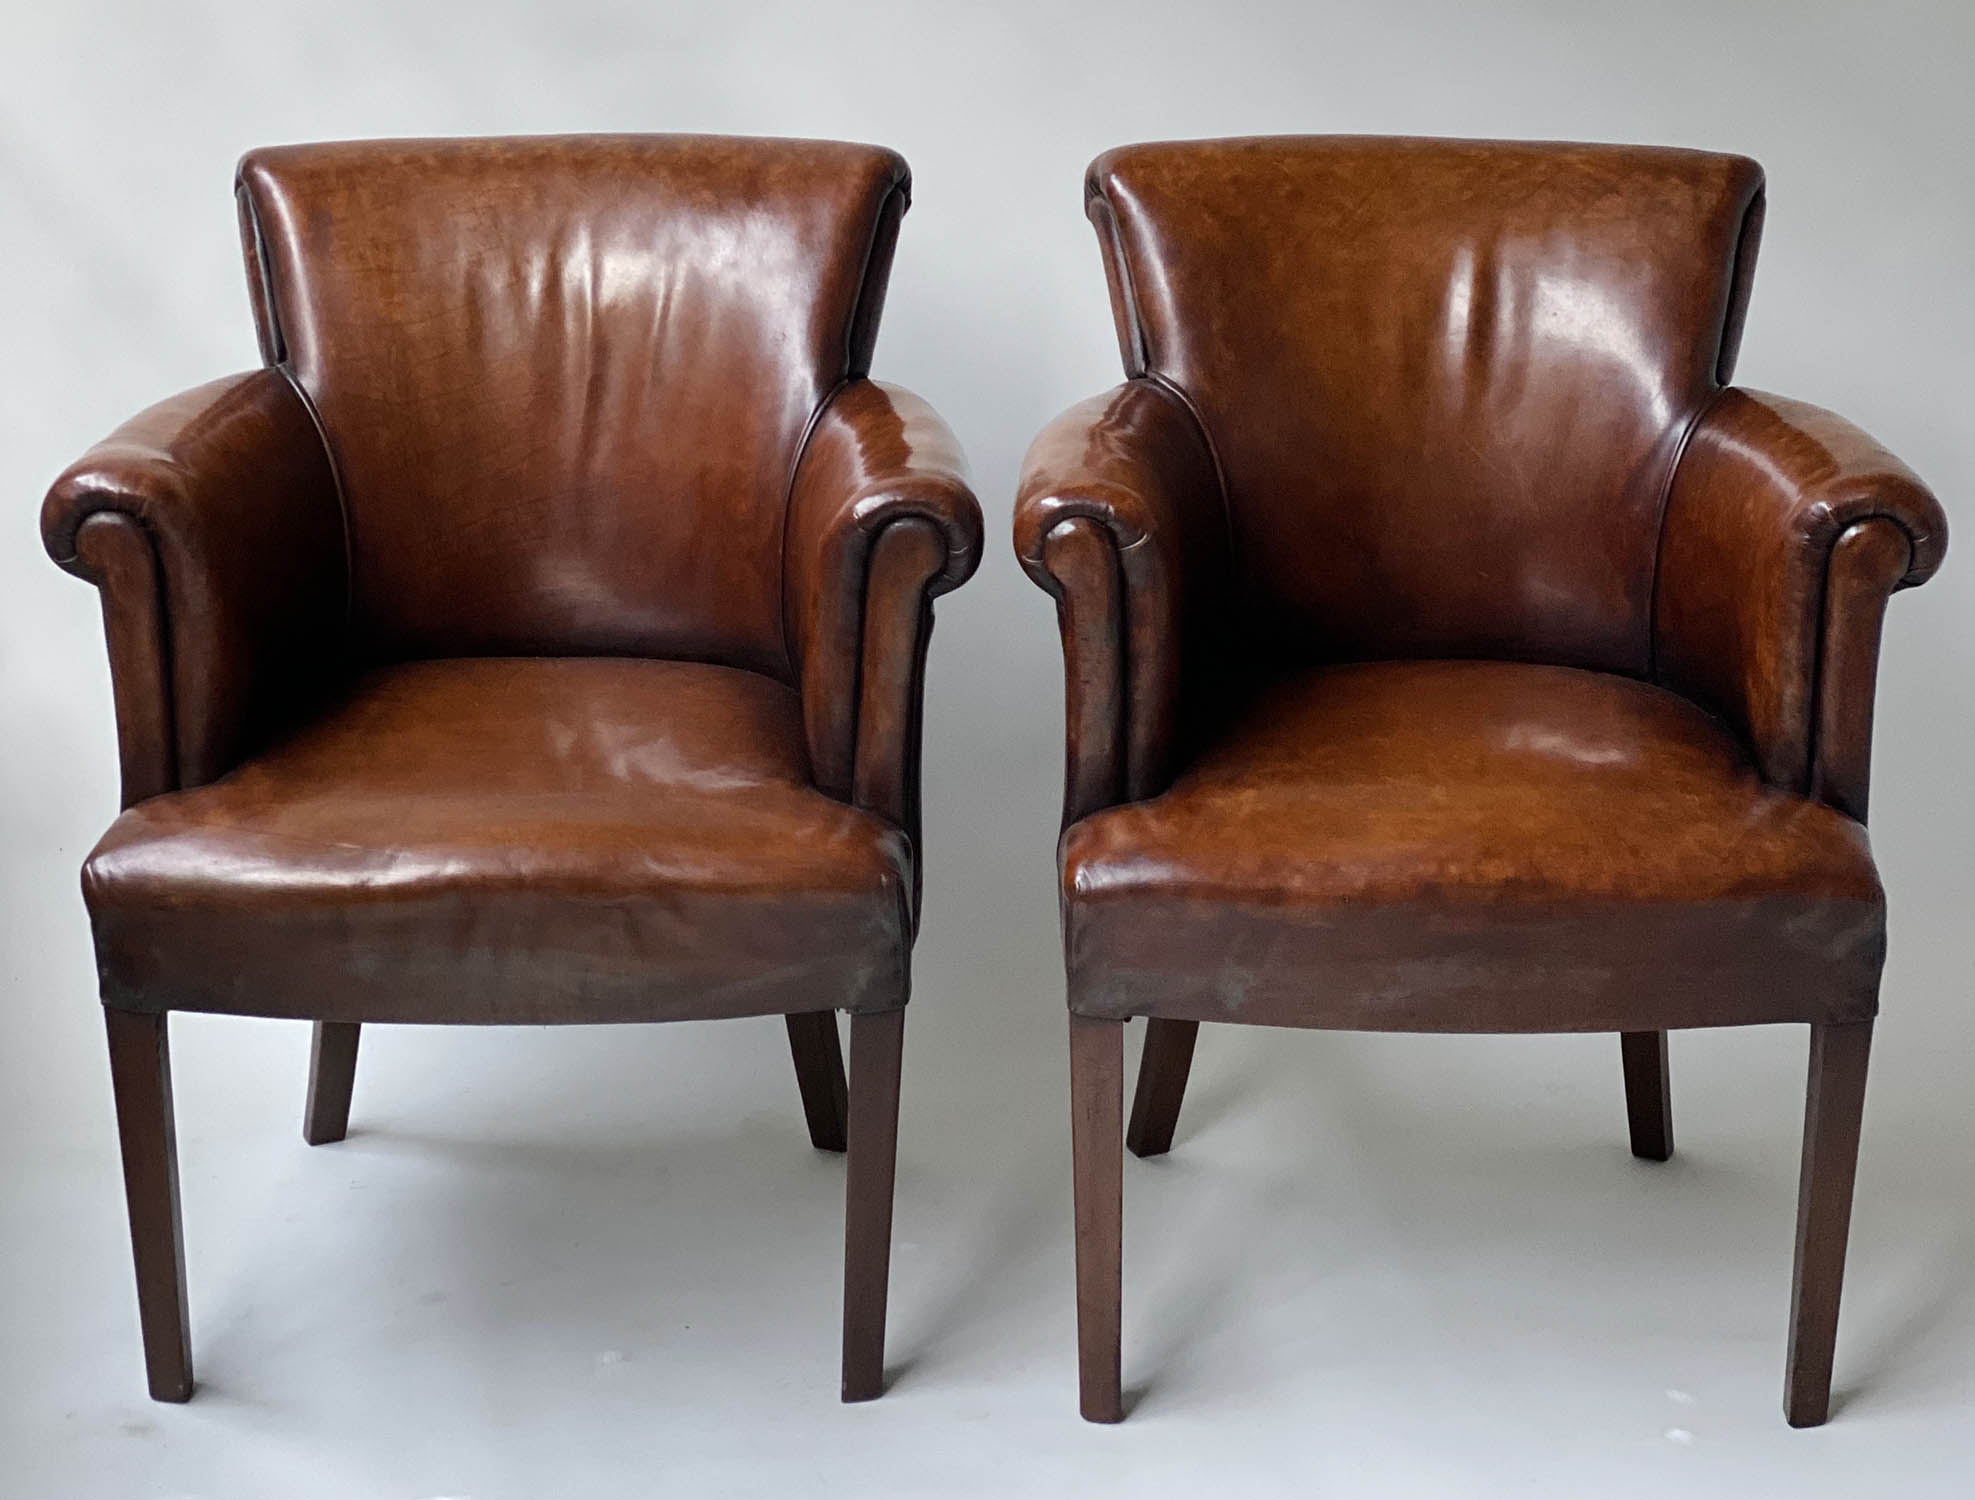 TUB ARMCHAIRS, a pair, vintage hand dyed tobacco brown leather, with arched rounded backs and